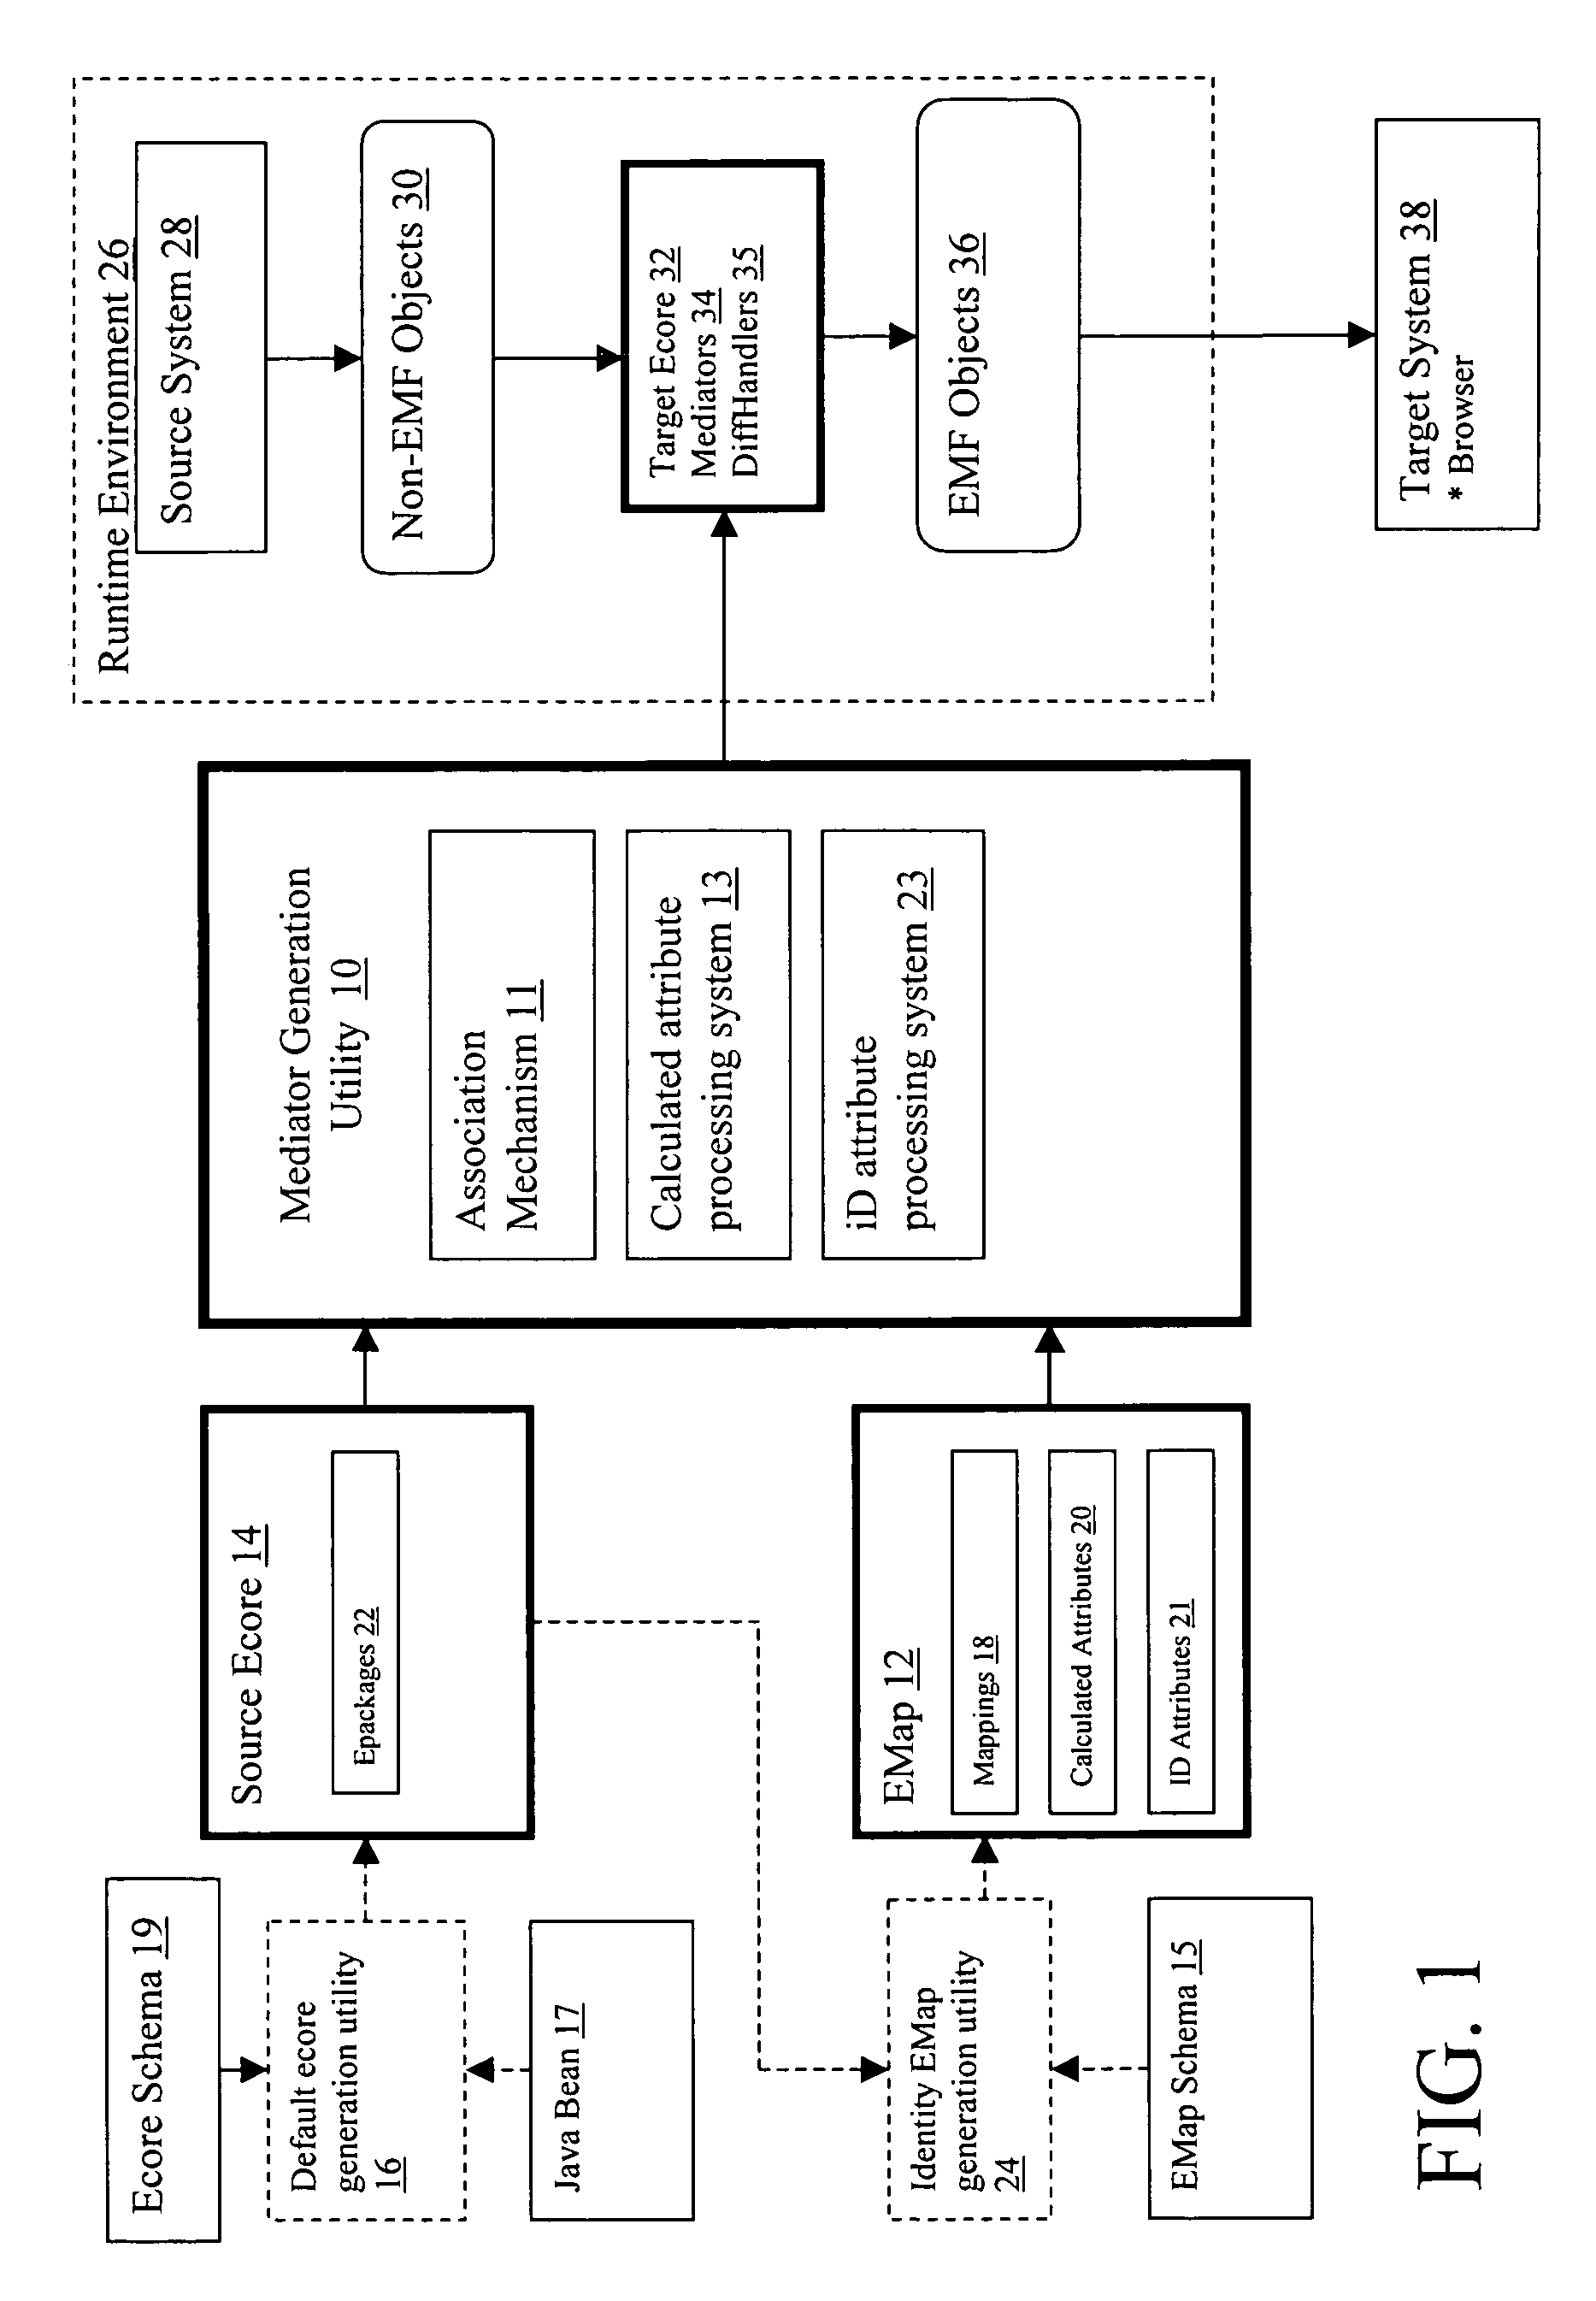 System and method for utilizing non-EMF based objects in an EMF environment